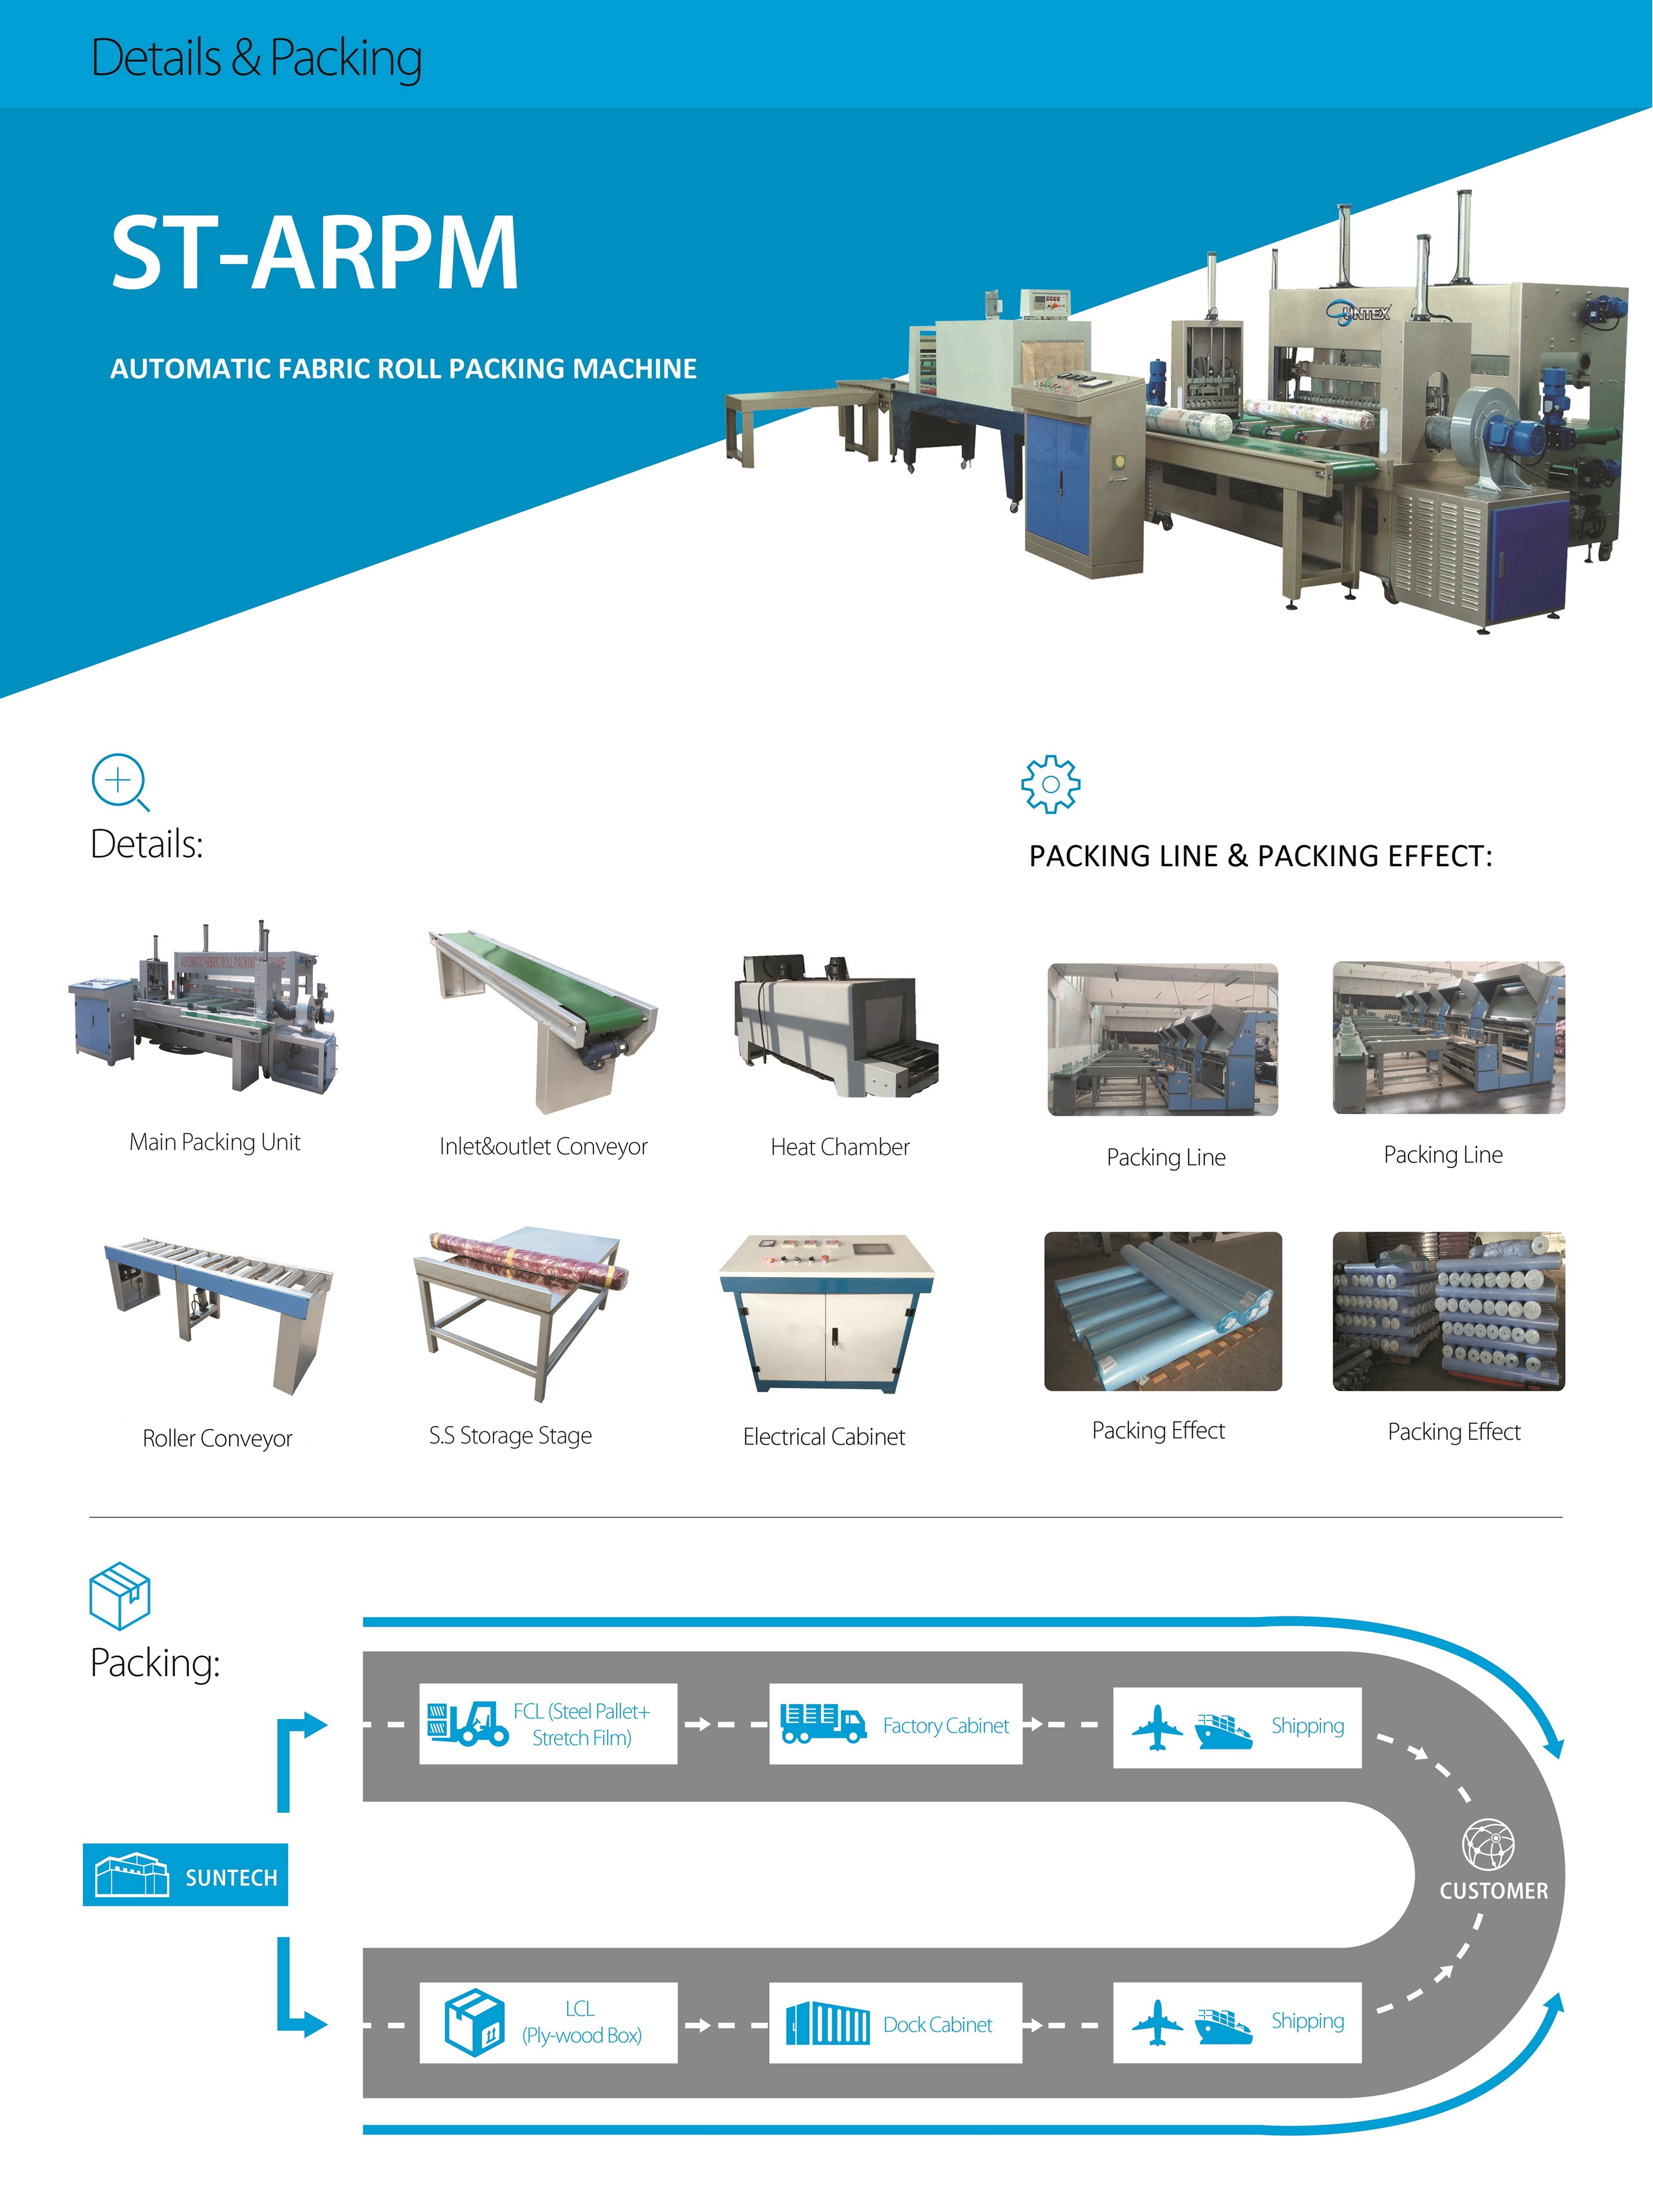 SUNTECH Automatic Fabric Roll Packing Machine improve 6 times efficiency. 